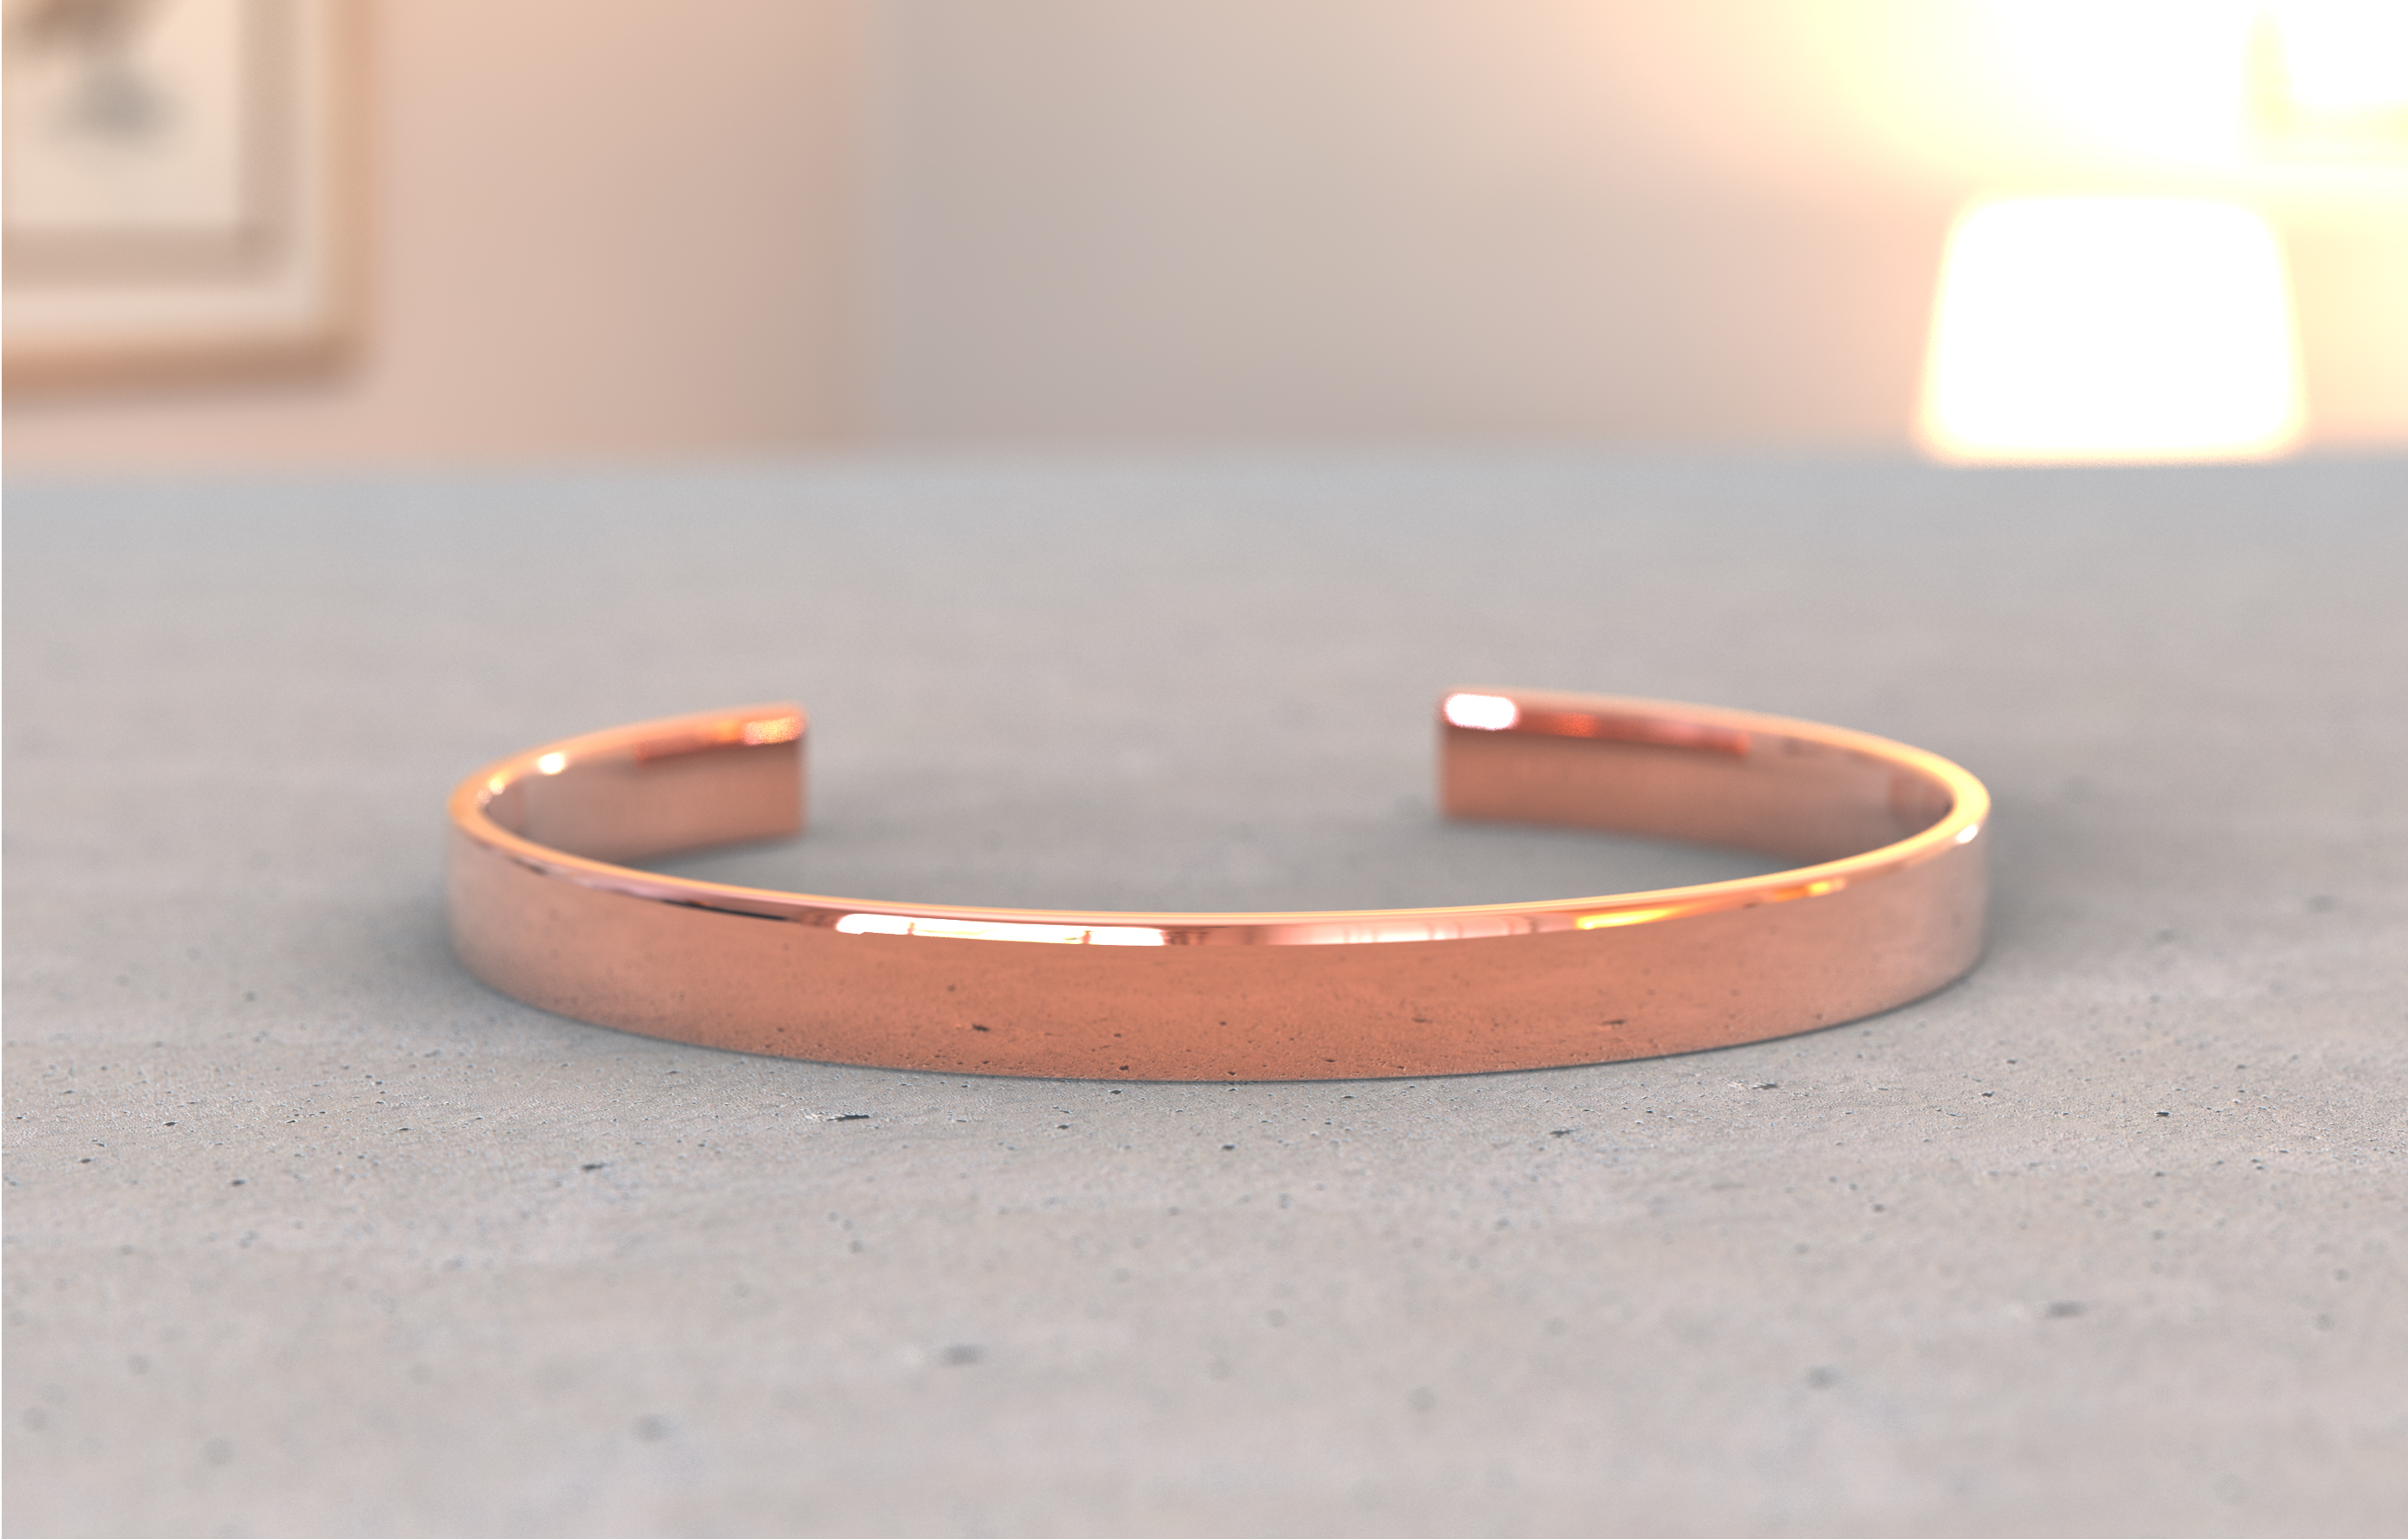 Amazon.com: MagEnergy Copper Bracelets for Women 99.9% Pure Copper Magnetic  Bracelet and Rings Adjustable Bangle Gift Box(3 Lines) : Health & Household